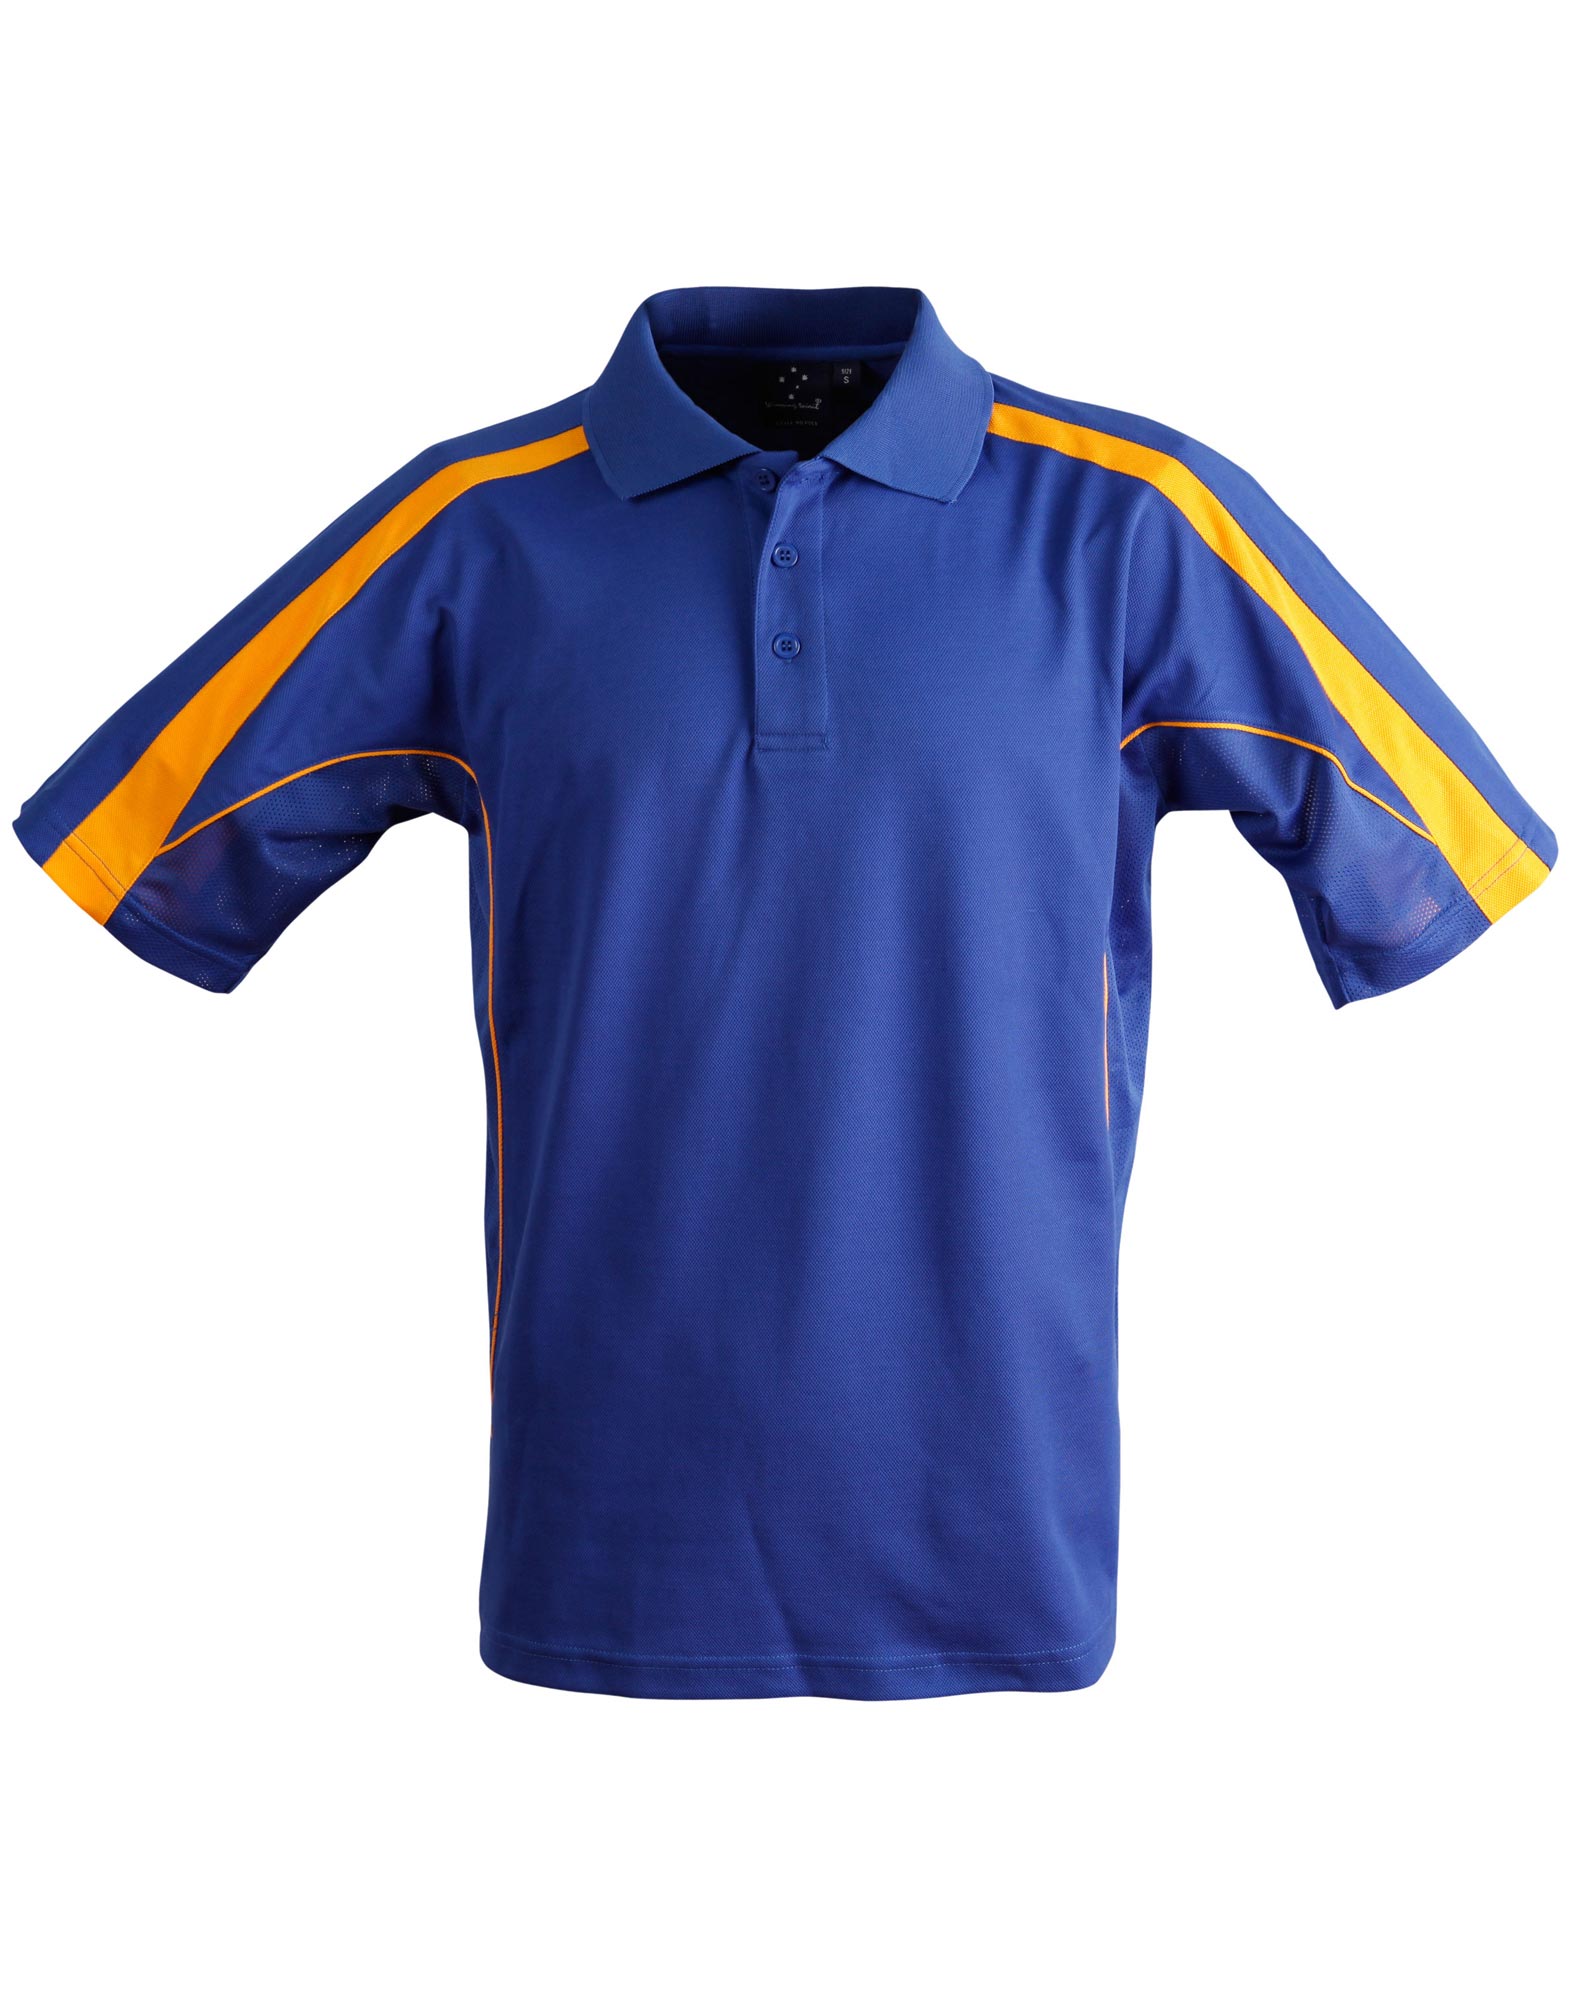 POLO MENS ROYAL/GOLD 2XL -LEGEND TRUDRY